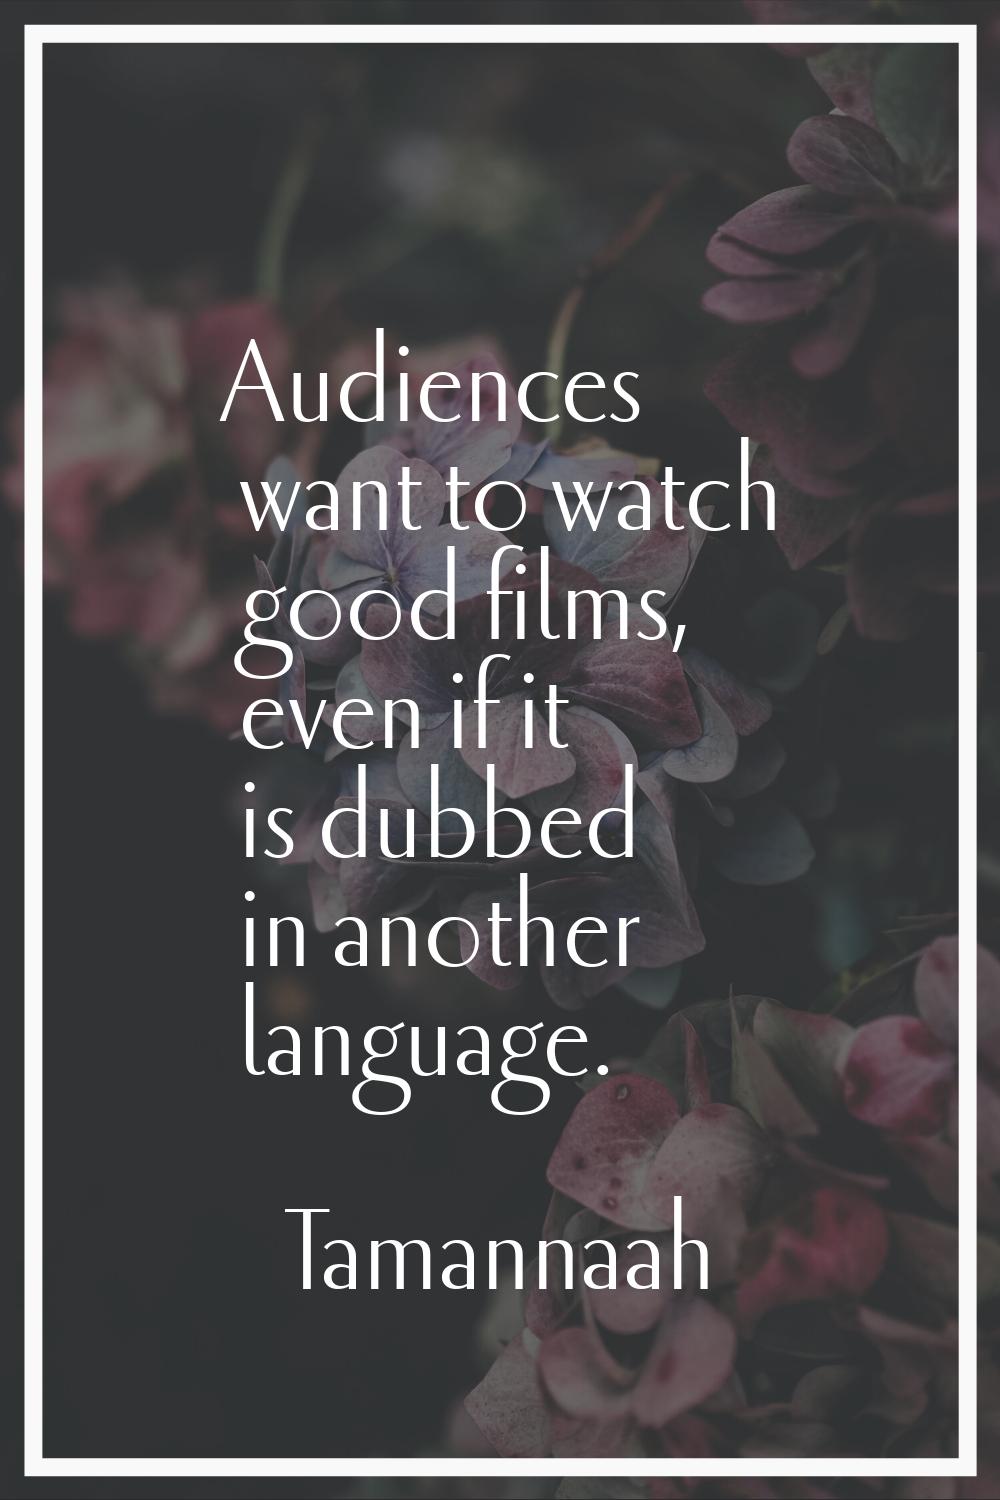 Audiences want to watch good films, even if it is dubbed in another language.